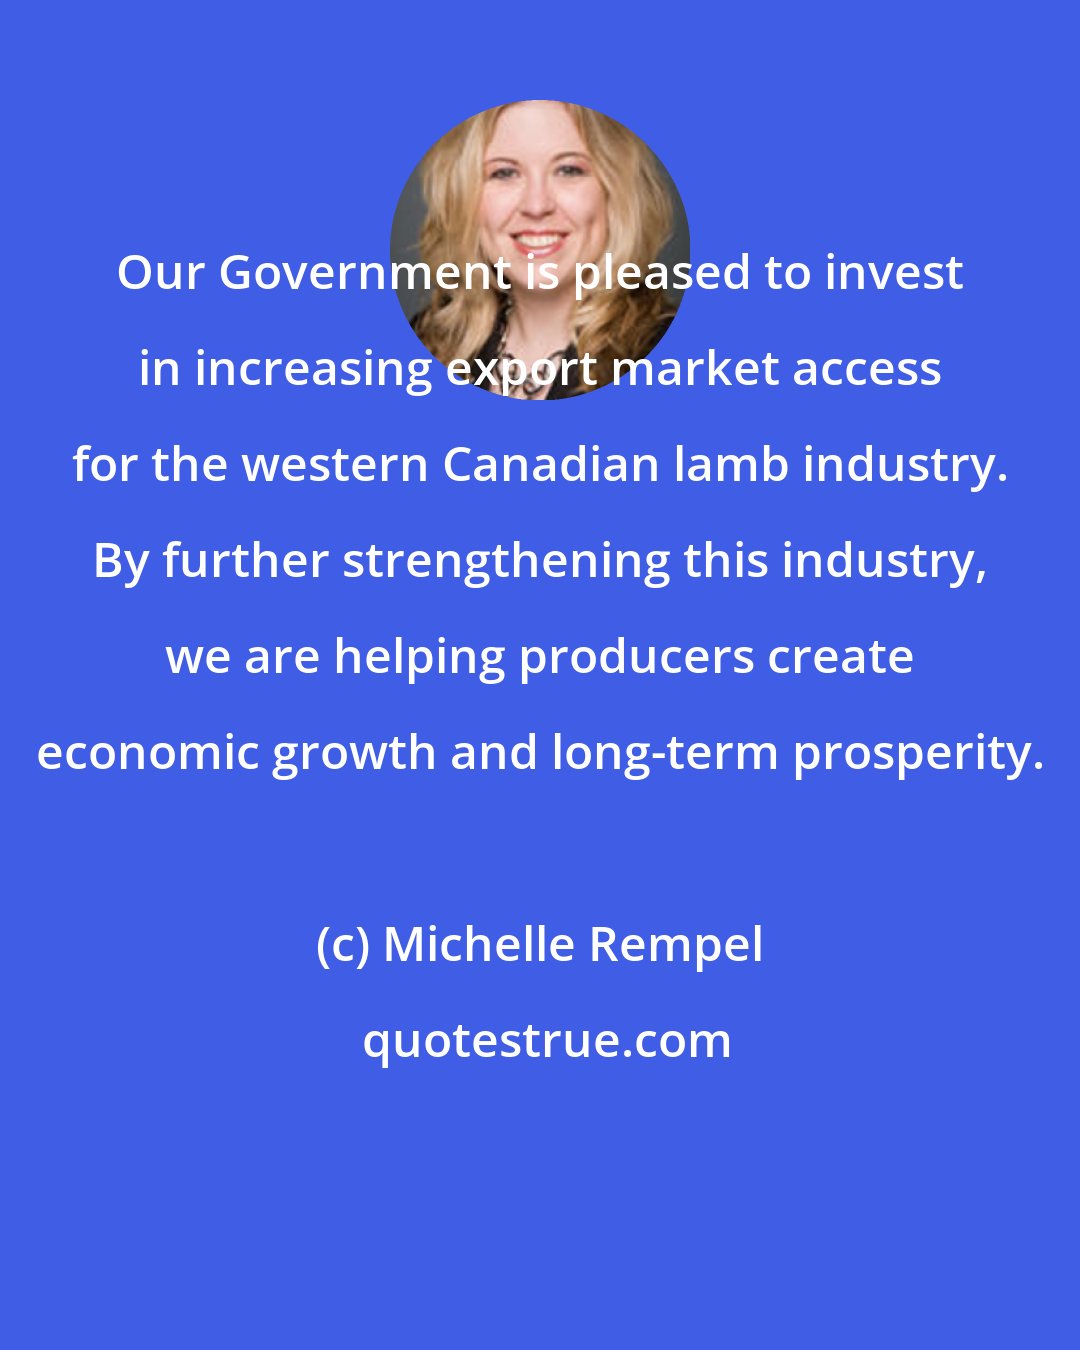 Michelle Rempel: Our Government is pleased to invest in increasing export market access for the western Canadian lamb industry. By further strengthening this industry, we are helping producers create economic growth and long-term prosperity.